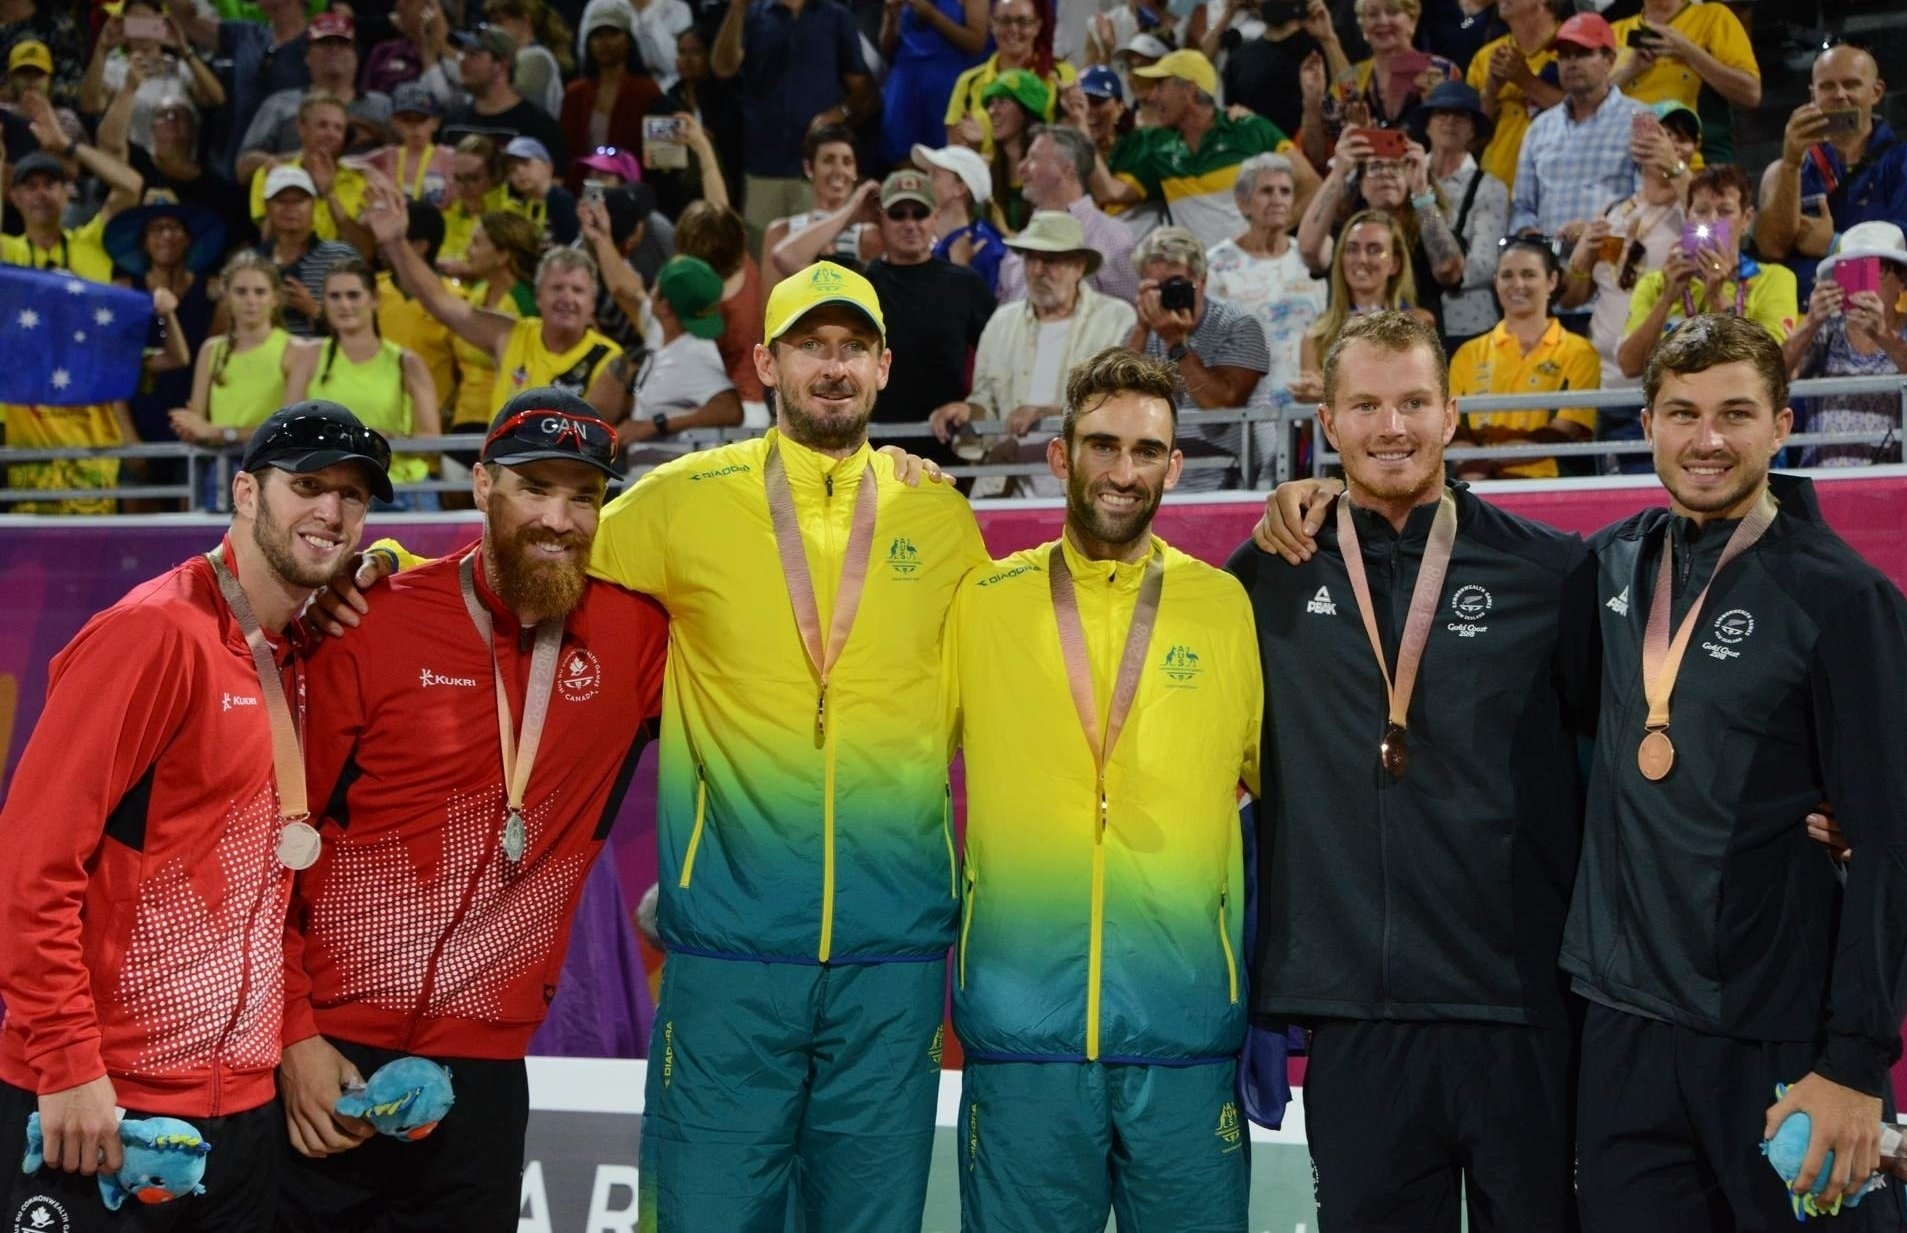 Chris (left, center) and Damien (right, center) top the podium after their dramatic Commonwealth Games final in Gold Coast